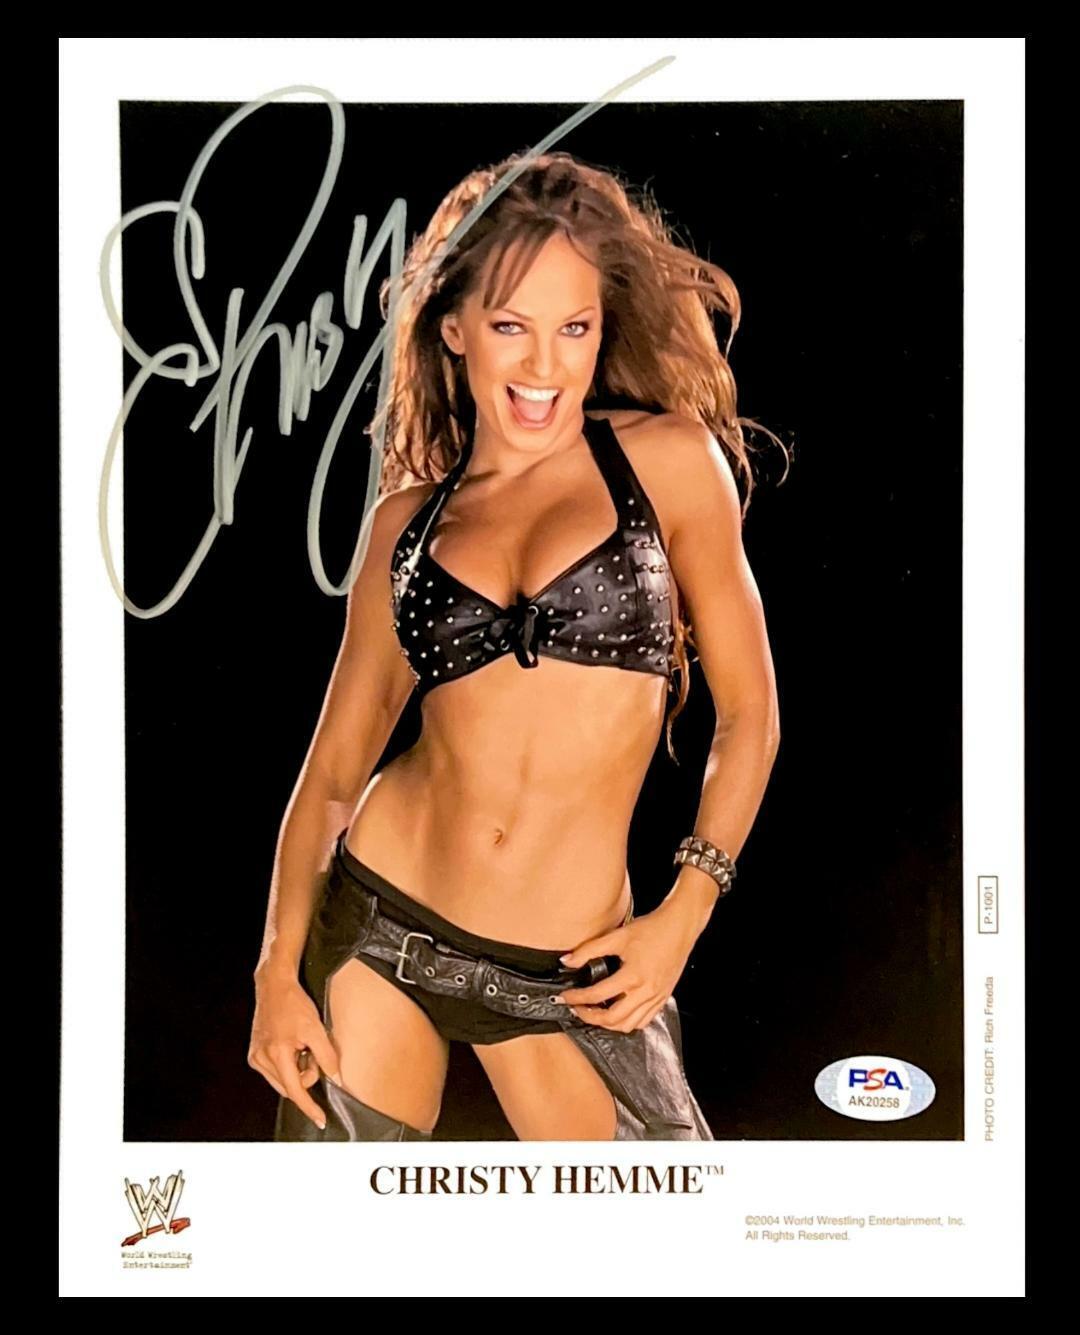 WWE CHRISTY HEMME P-1001 HAND SIGNED AUTOGRAPHED 8X10 PROMO Photo Poster painting WITH PSA COA